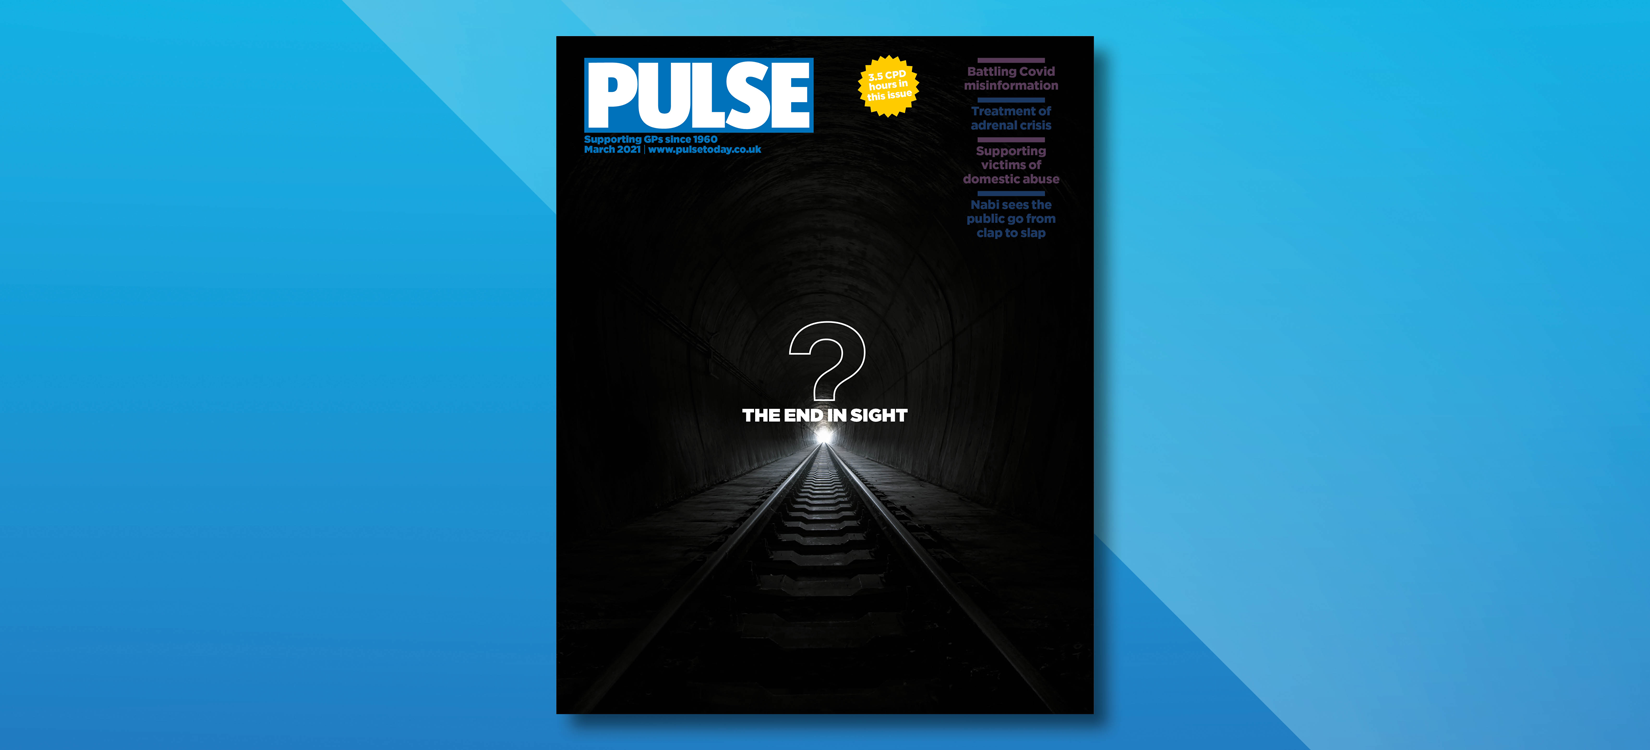 Pulse March 2021 cover